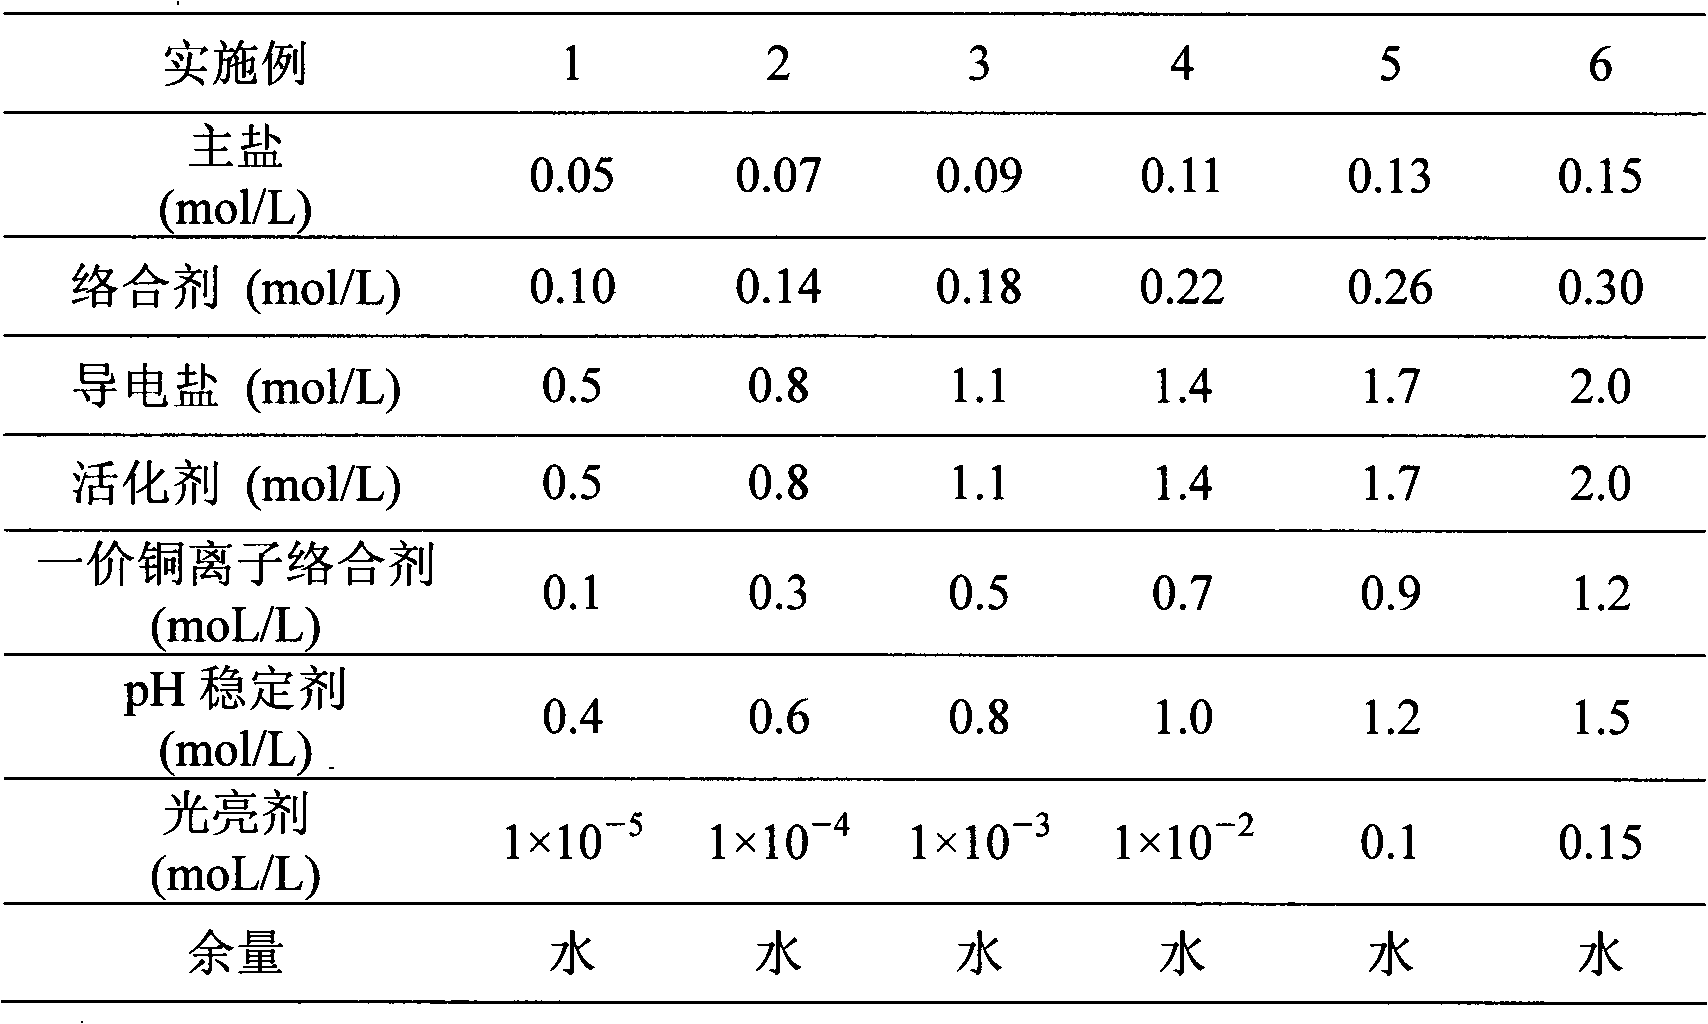 Alkaline non-cyanide plating solution for copper-plating used on iron and steel base and preparation method thereof